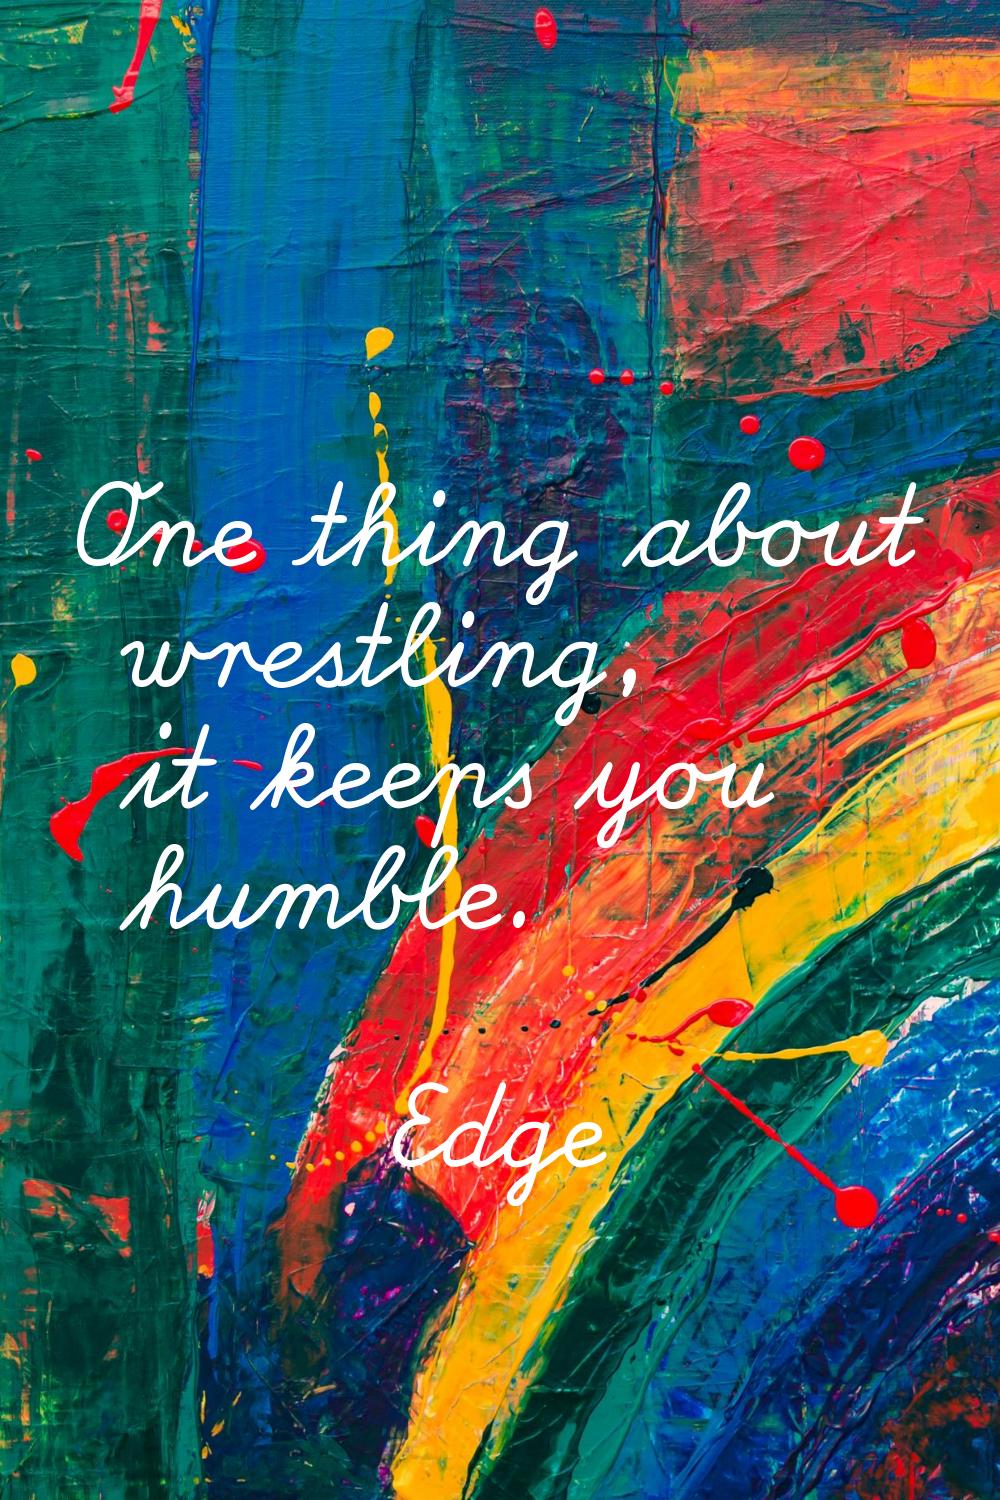 One thing about wrestling, it keeps you humble.